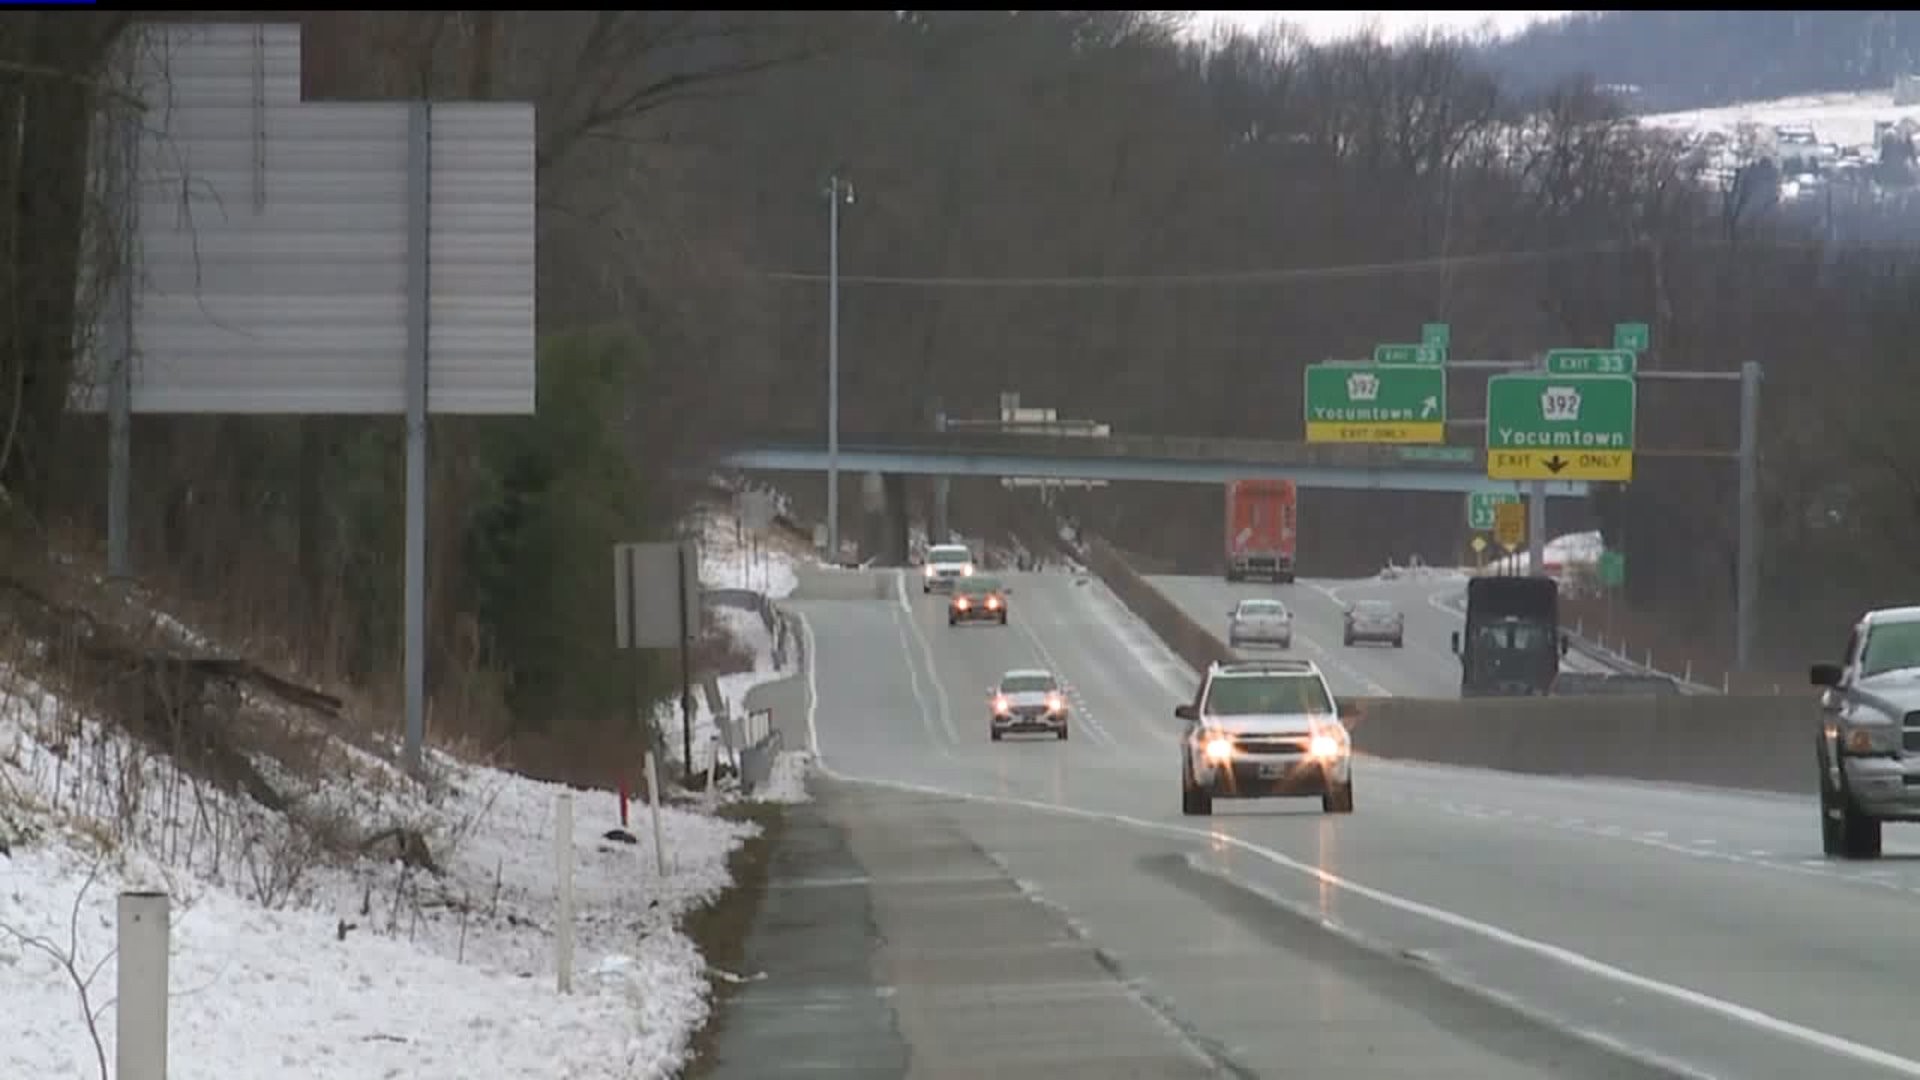 PennDOT continues to treat roads in the area